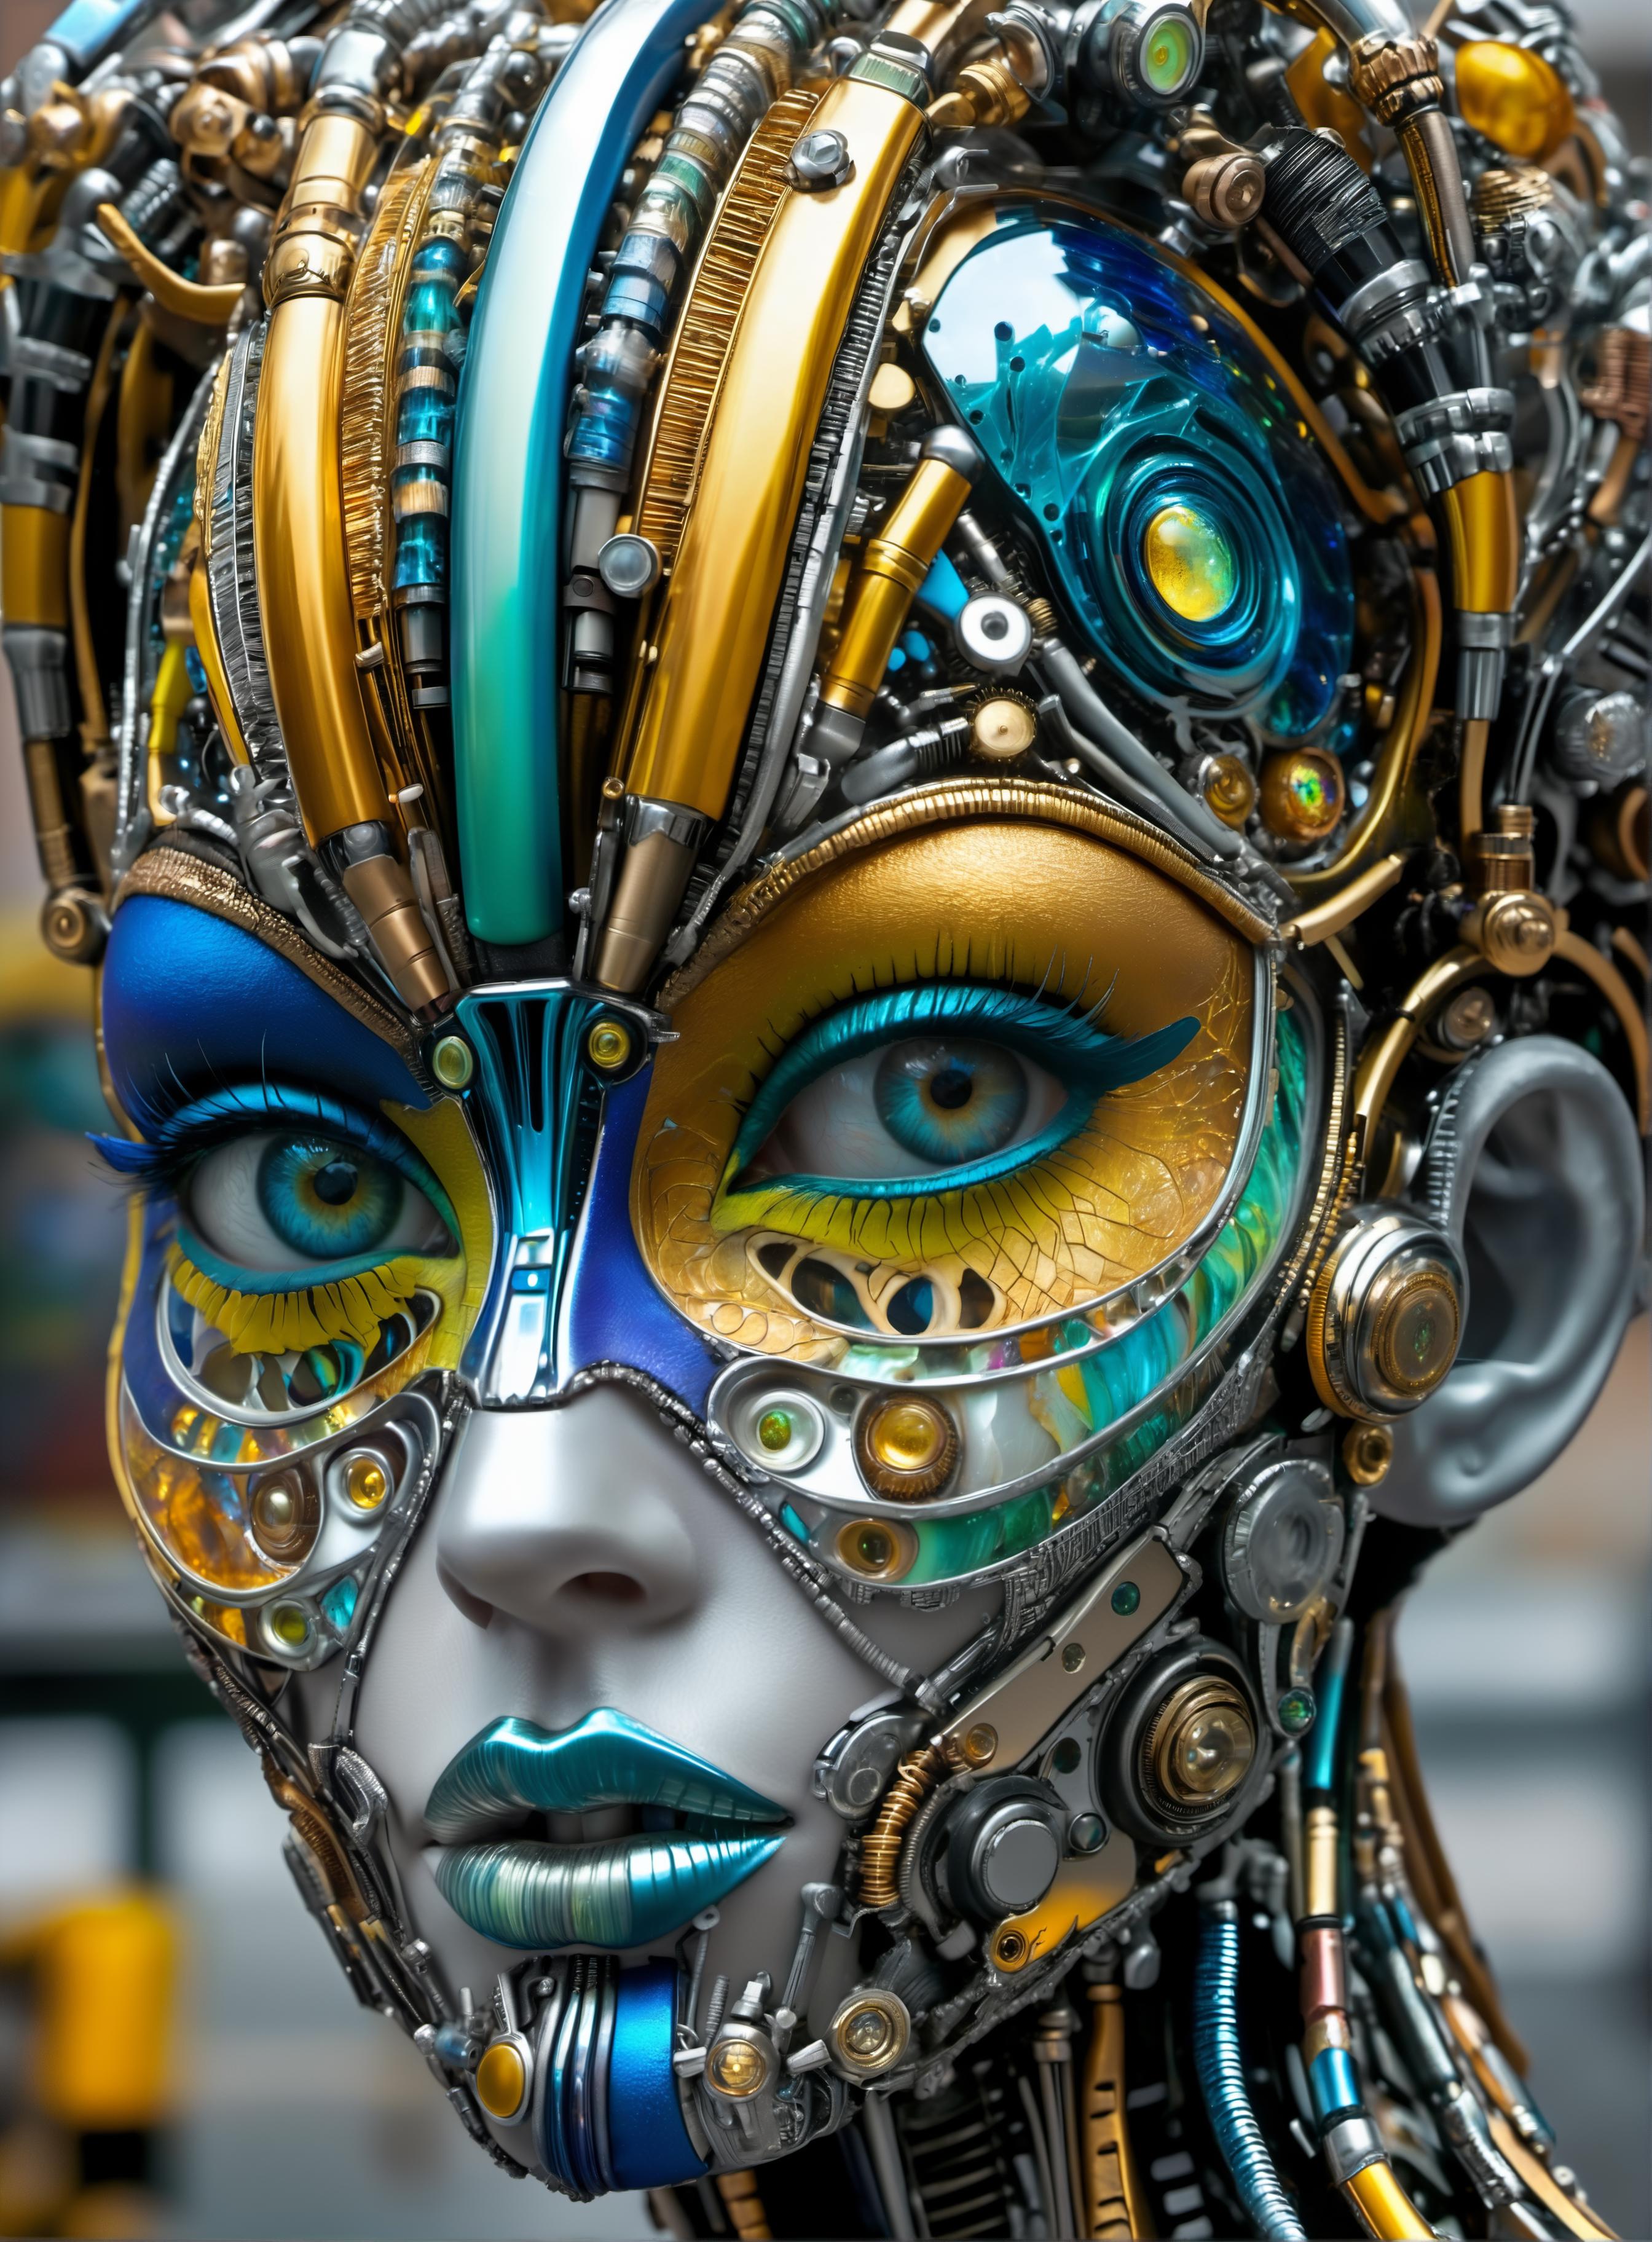 A robotic head with blue and yellow makeup and various gears and parts.